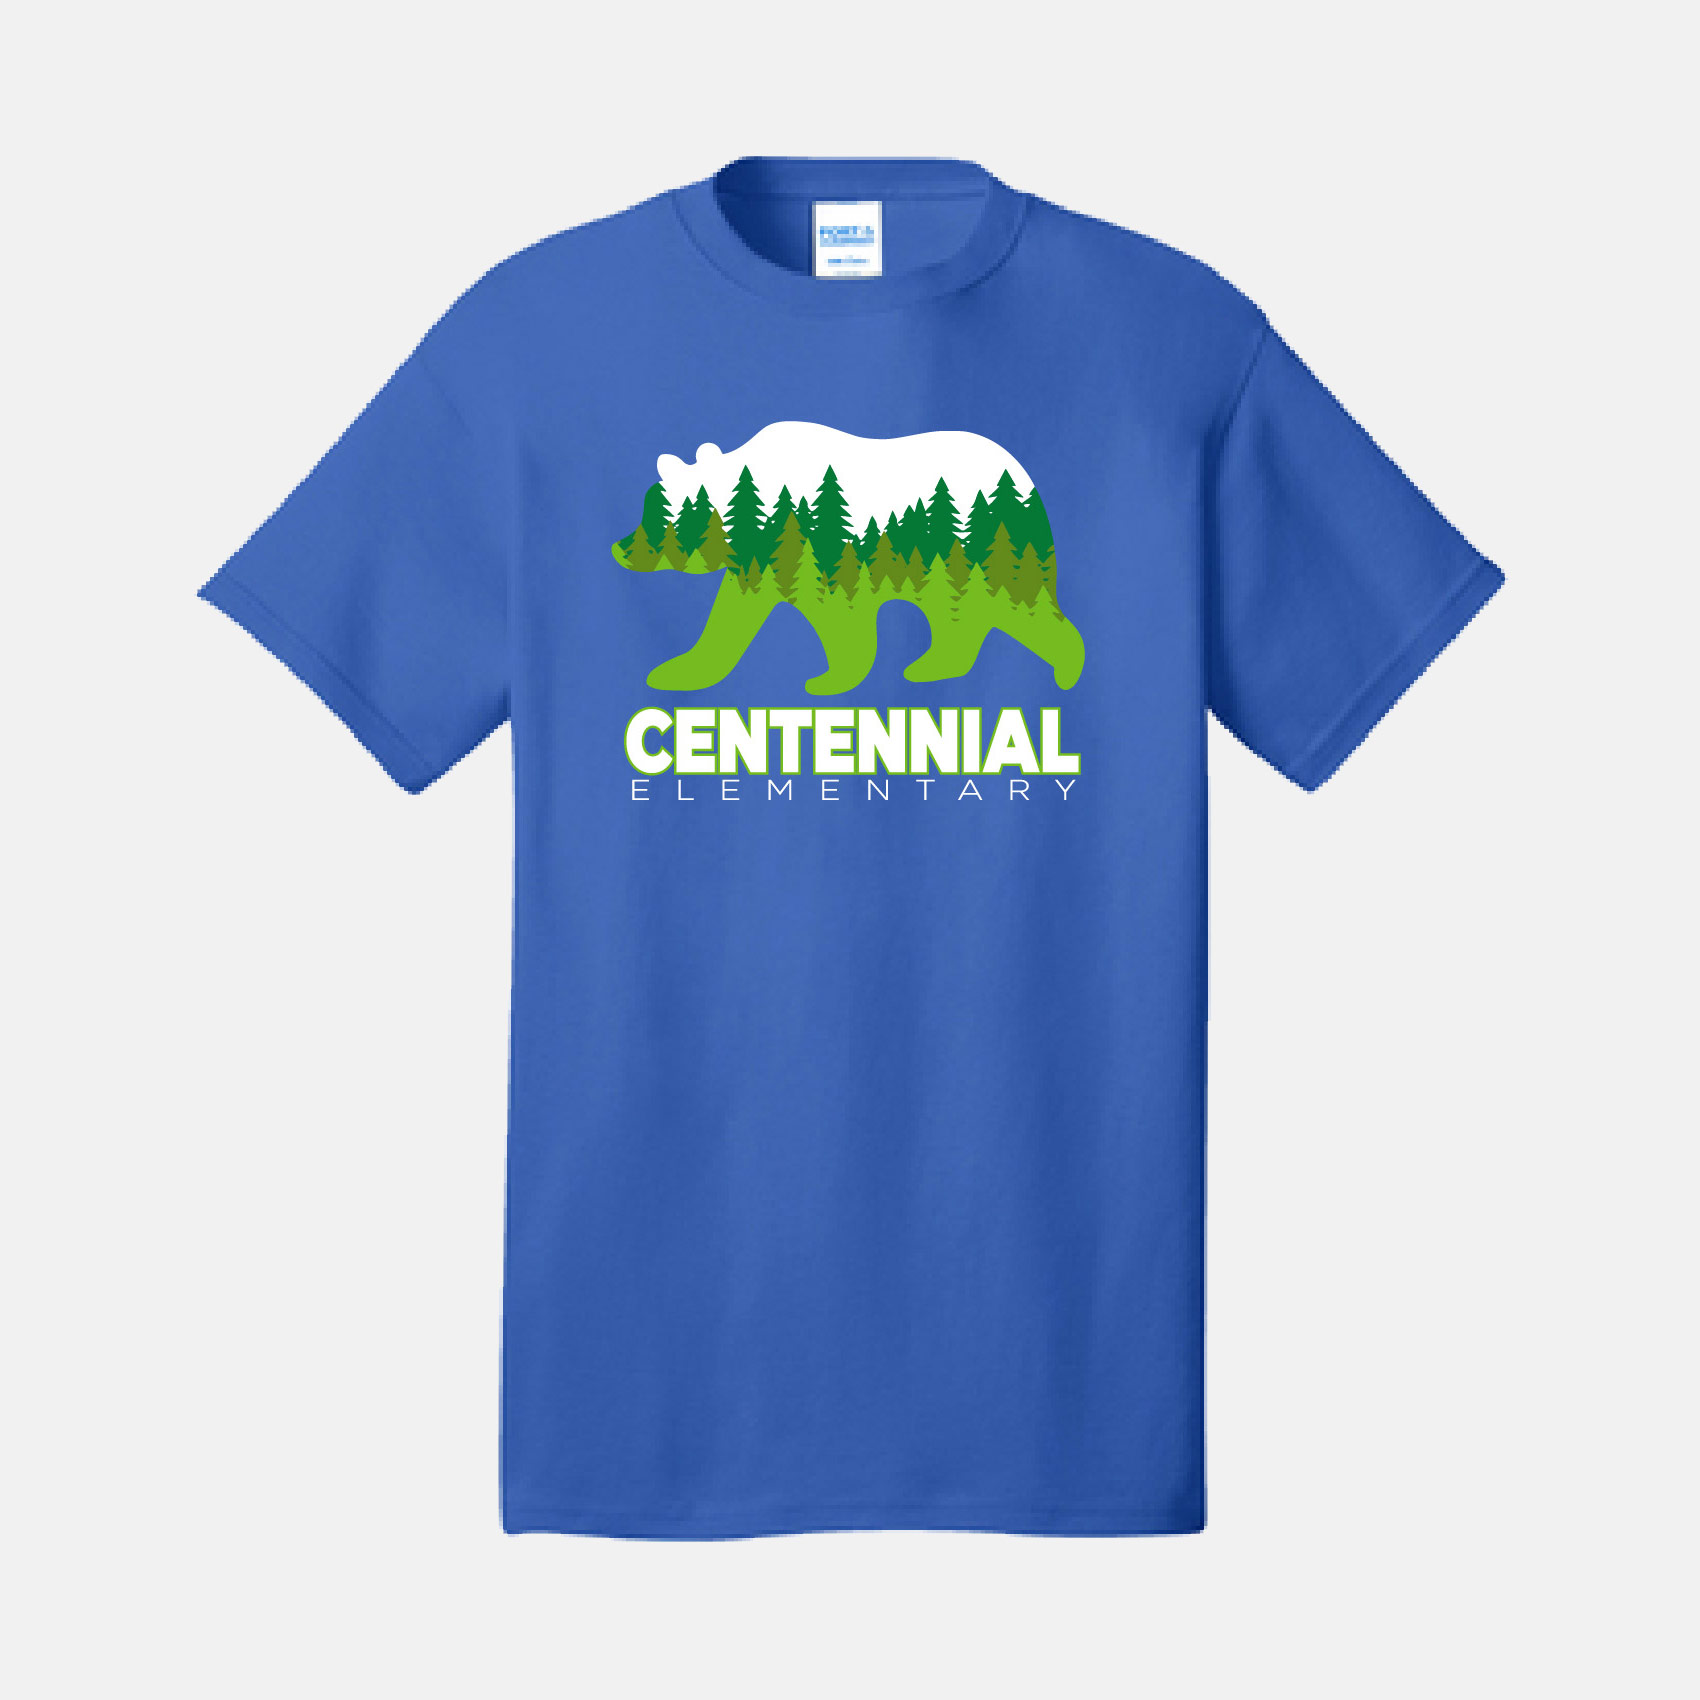 Centennial Elementary T-Shirt, in royal blue color with the school logo on it.